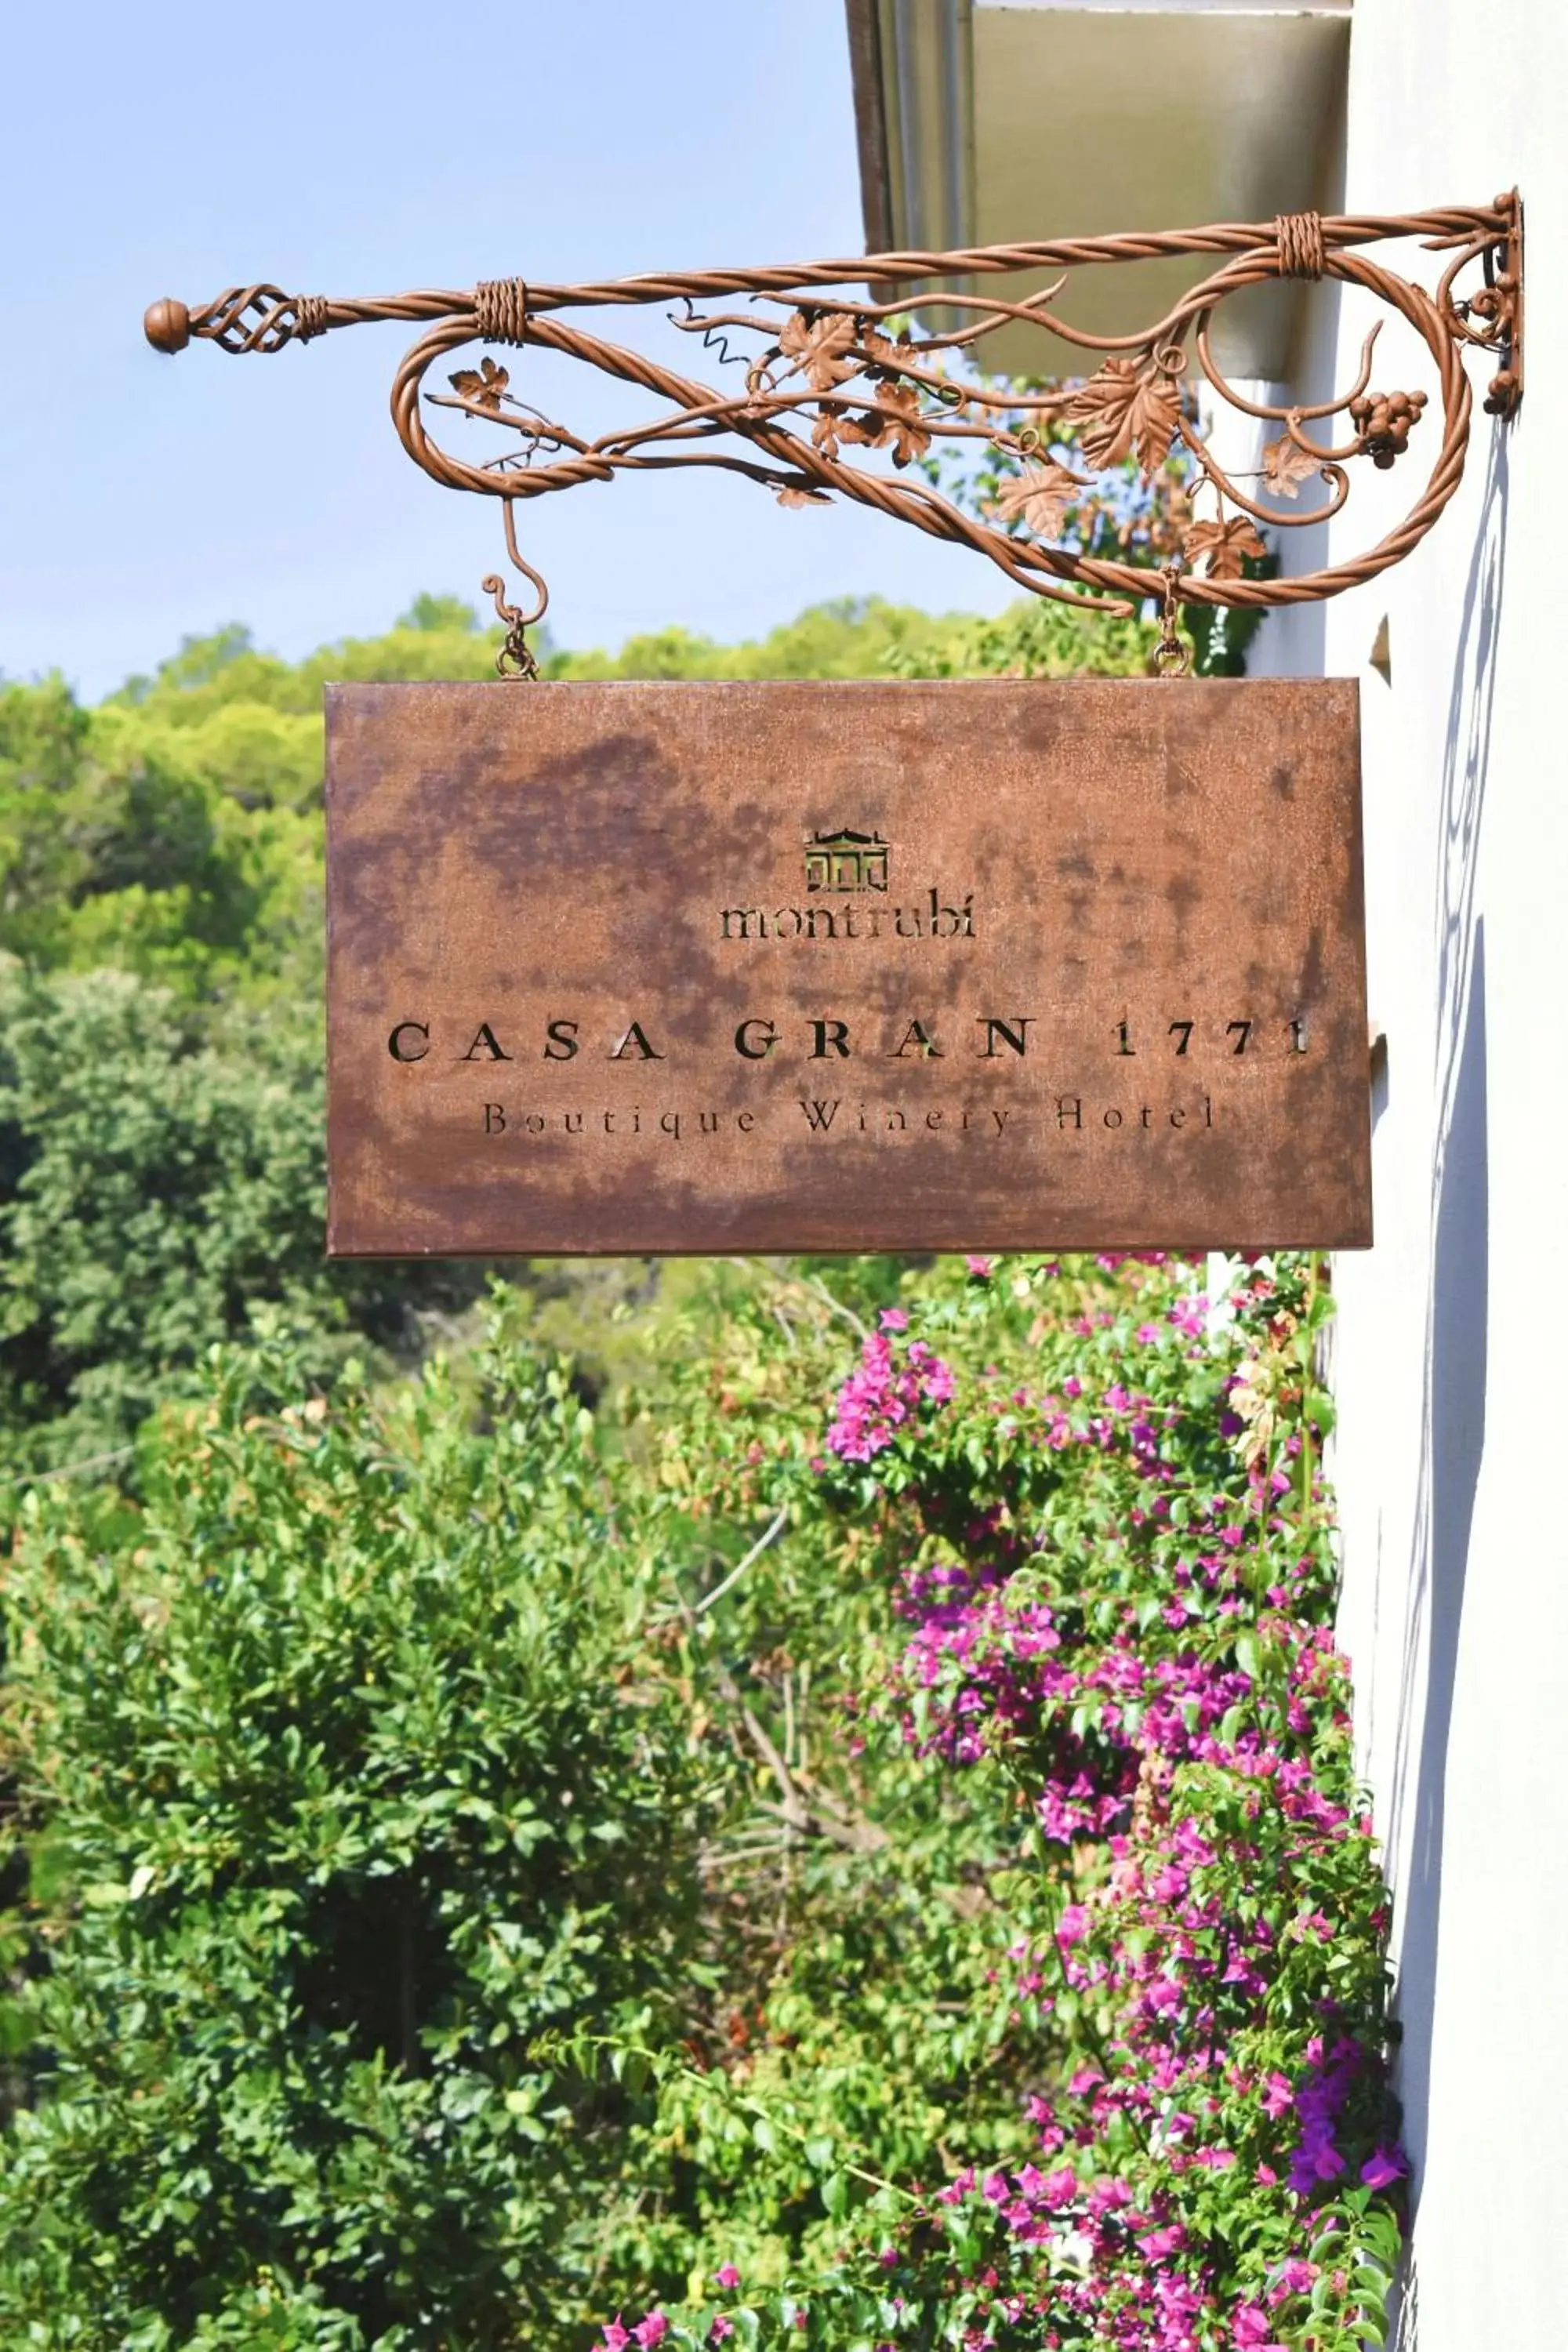 Property building, Property Logo/Sign in Casa Gran 1771 - Boutique Winery Hotel